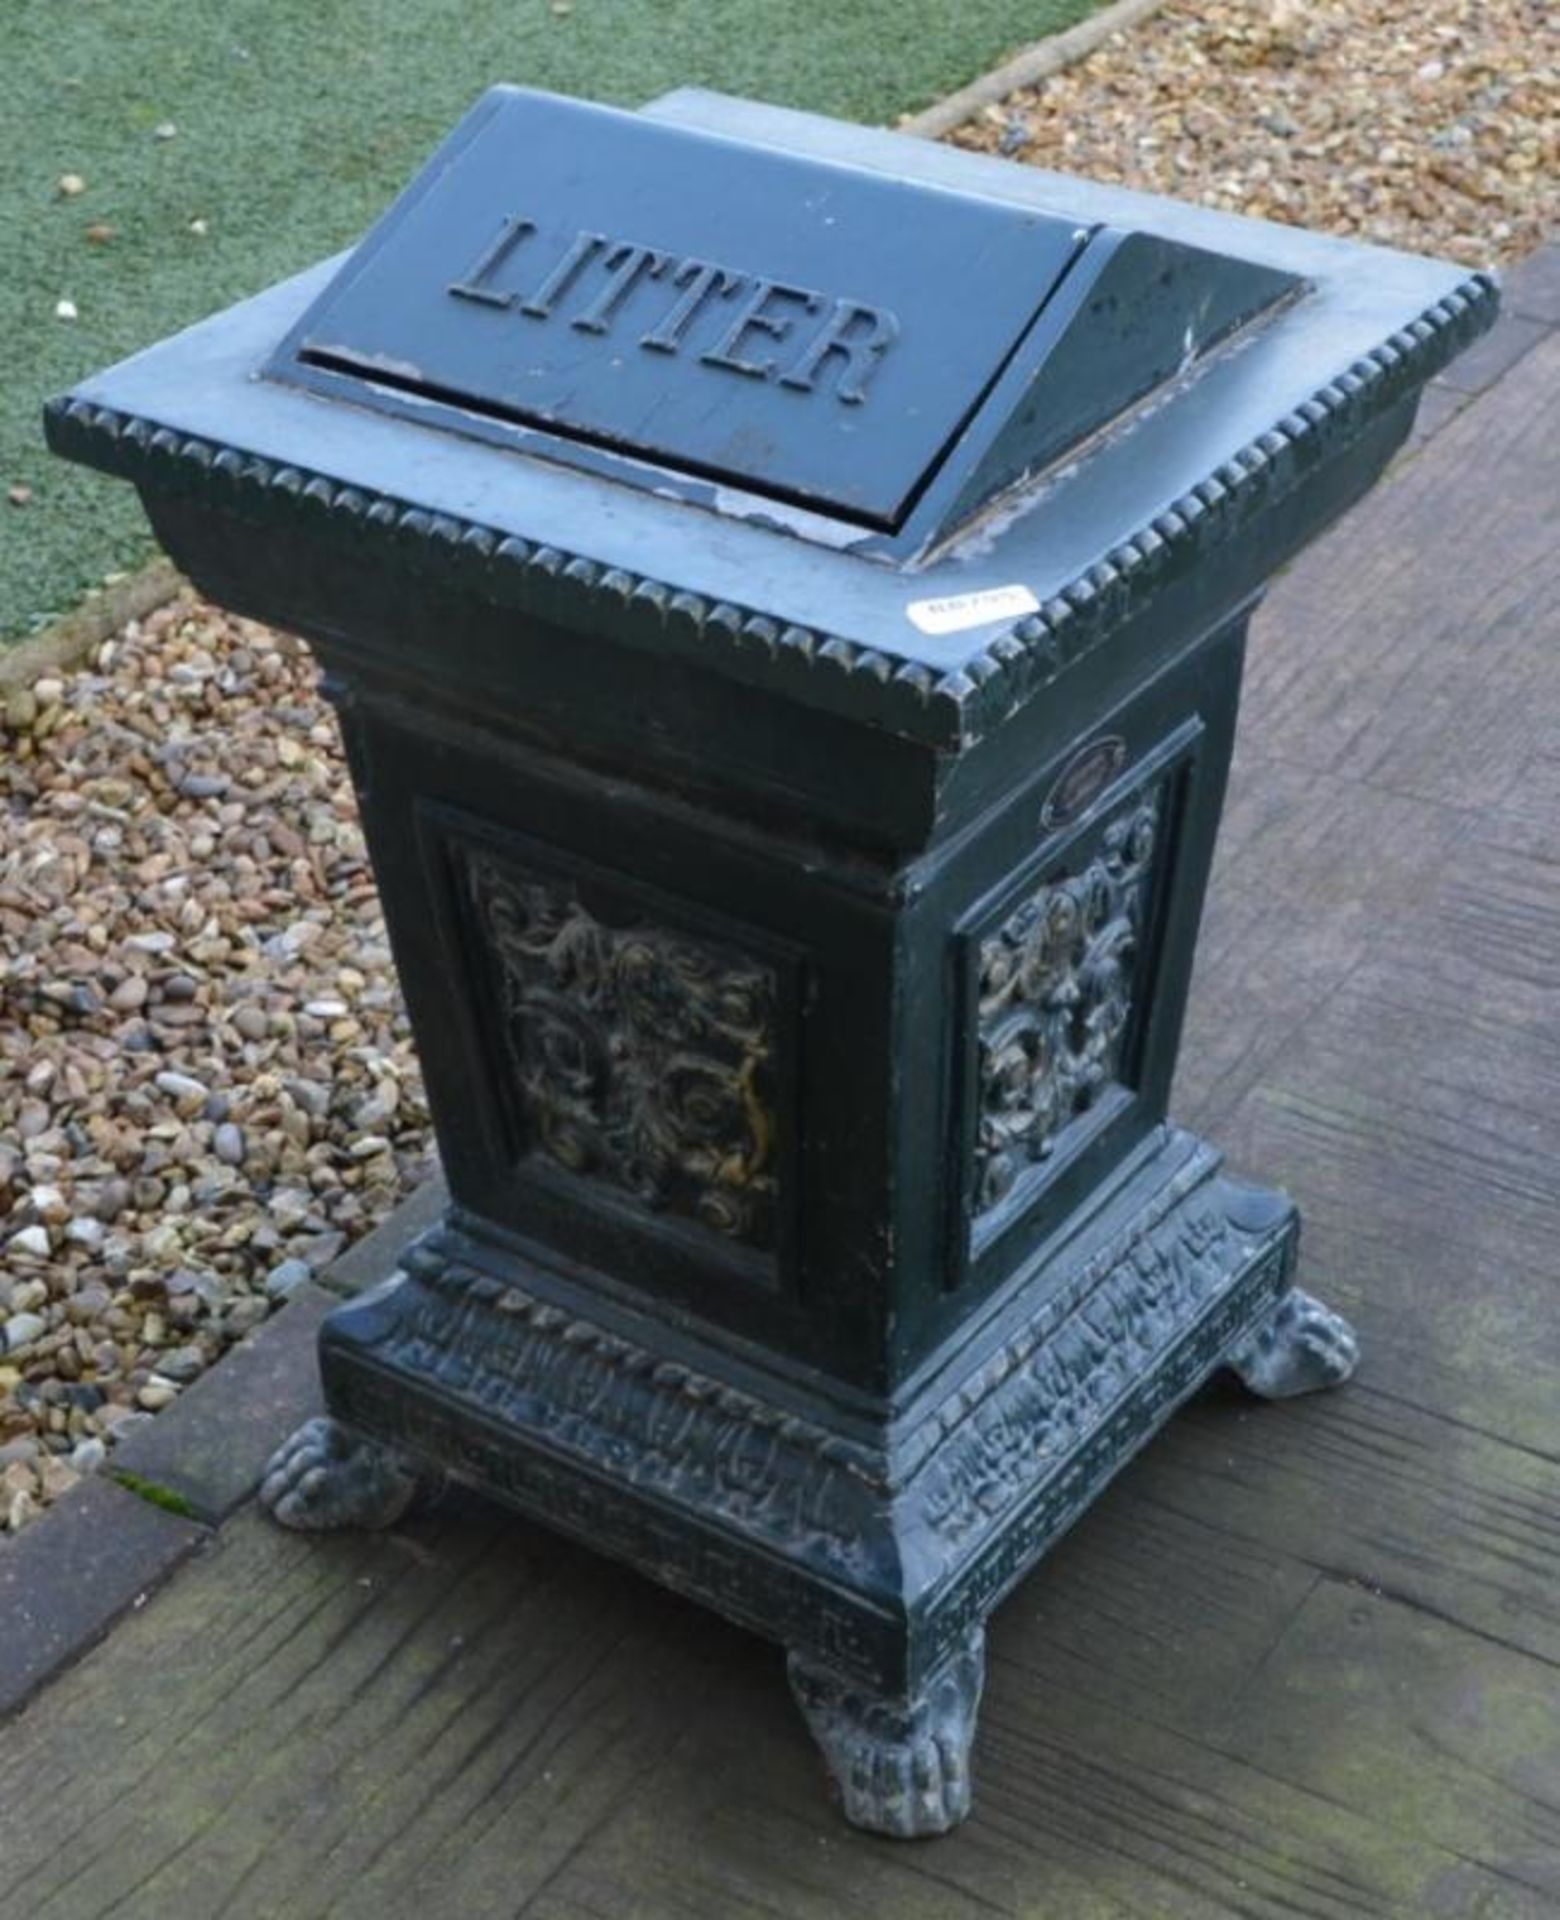 1 x Cast Metal Litter Bin in Green and Gold With Decorative Features and Claw Feet - H79 x W50 x D51 - Image 3 of 3